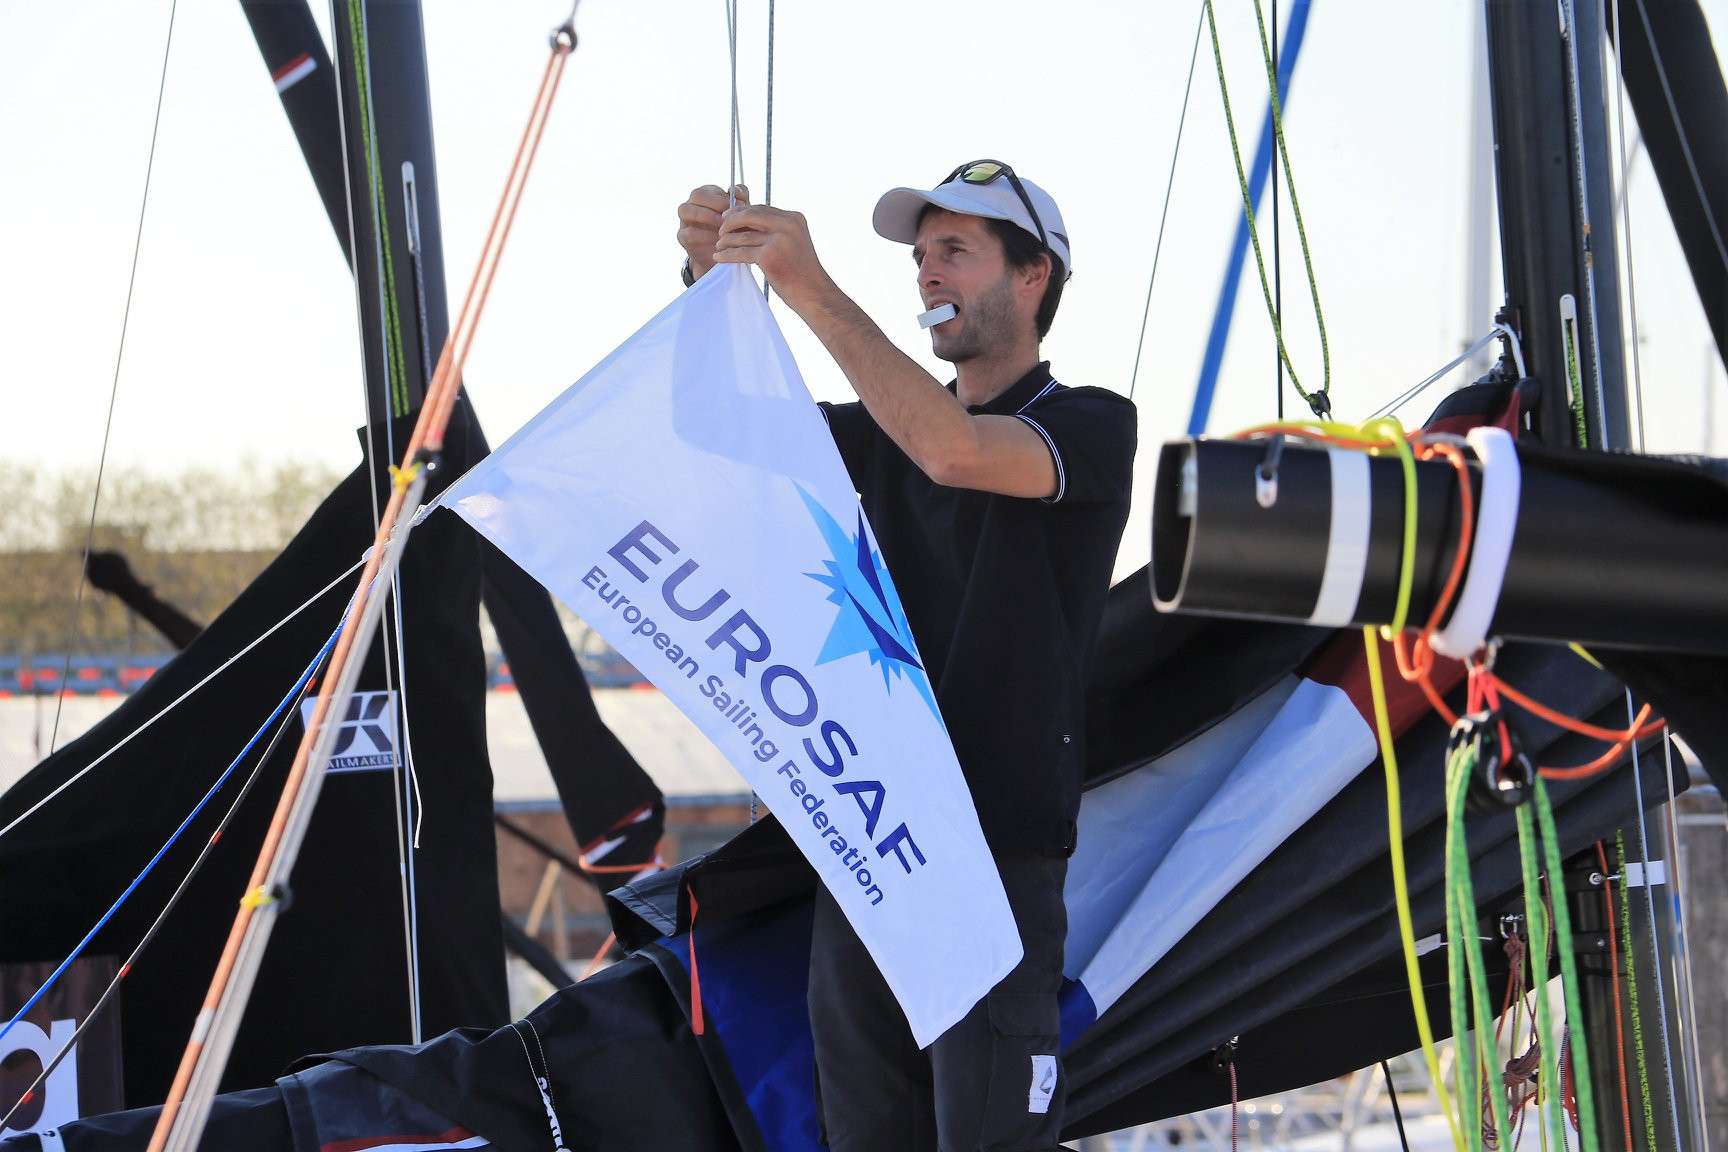 The in-port race on the opening day of the European Sailing Federation Mixed Offshore European Championship in Venice was cancelled due to poor weather conditions ©EUROSAF